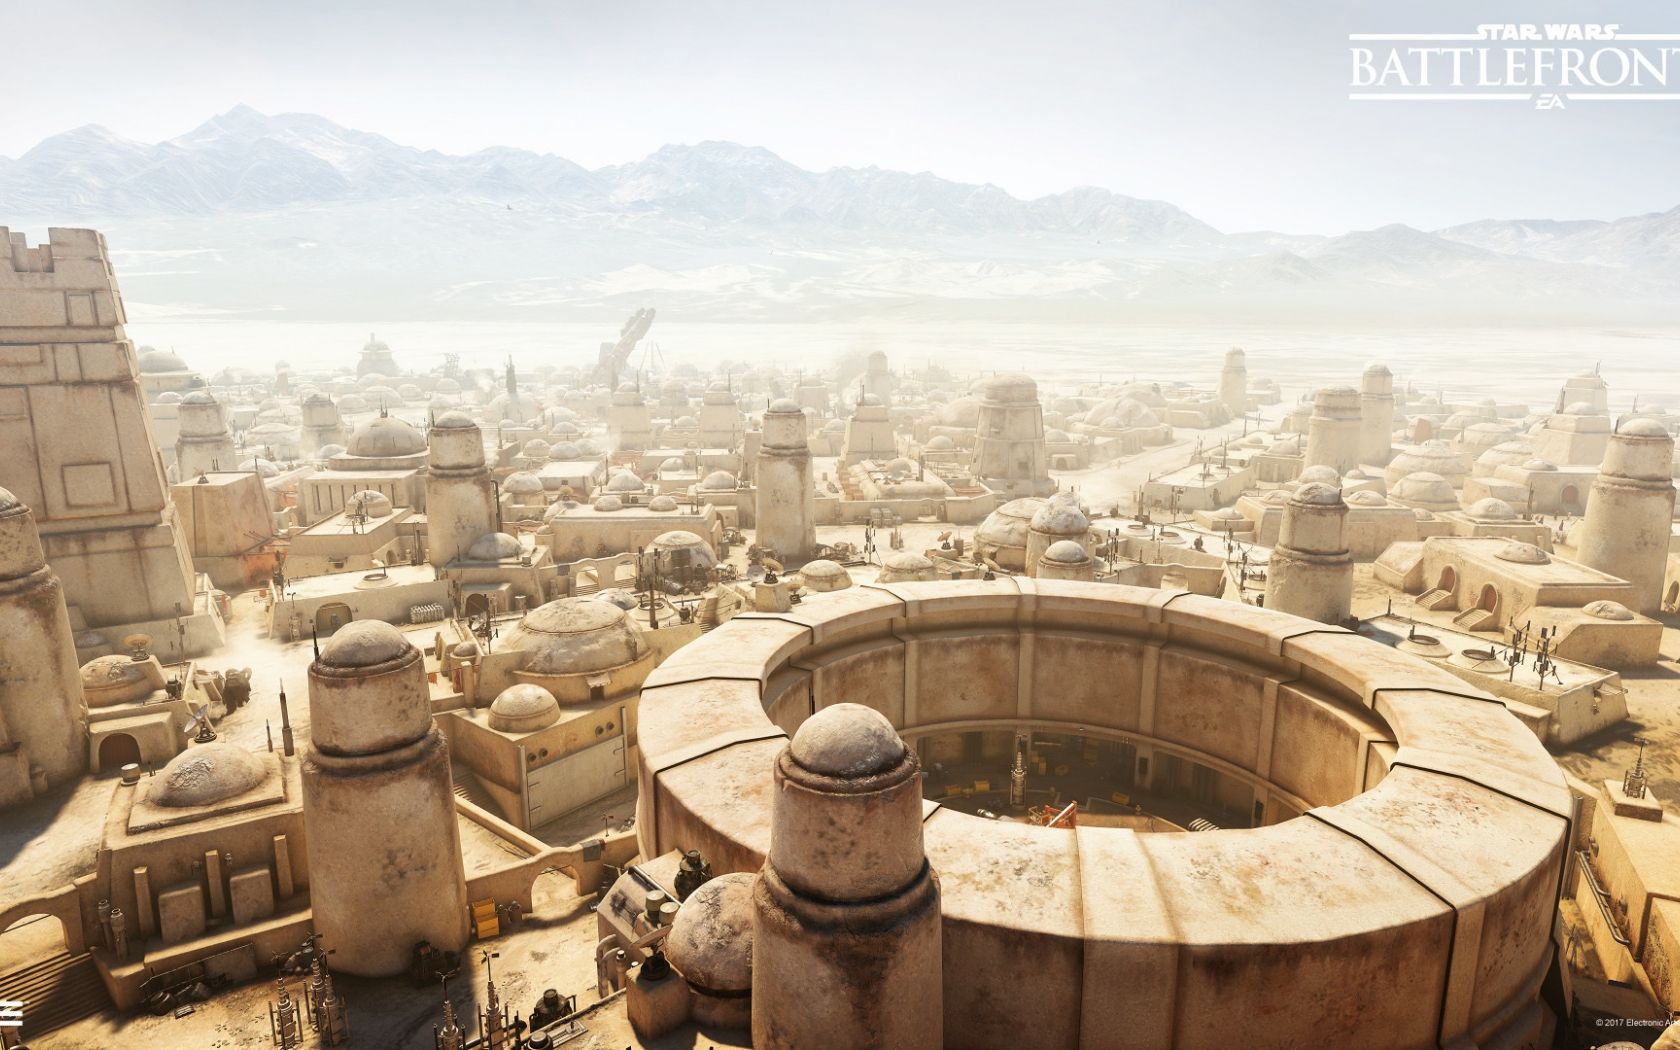 Free download Tatooine Mos Eisley Star Wars Battlefront Wiki powered [1920x1080] for your Desktop, Mobile & Tablet. Explore Star Wars Mos Eisley Background. Star Wars Mos Eisley Background